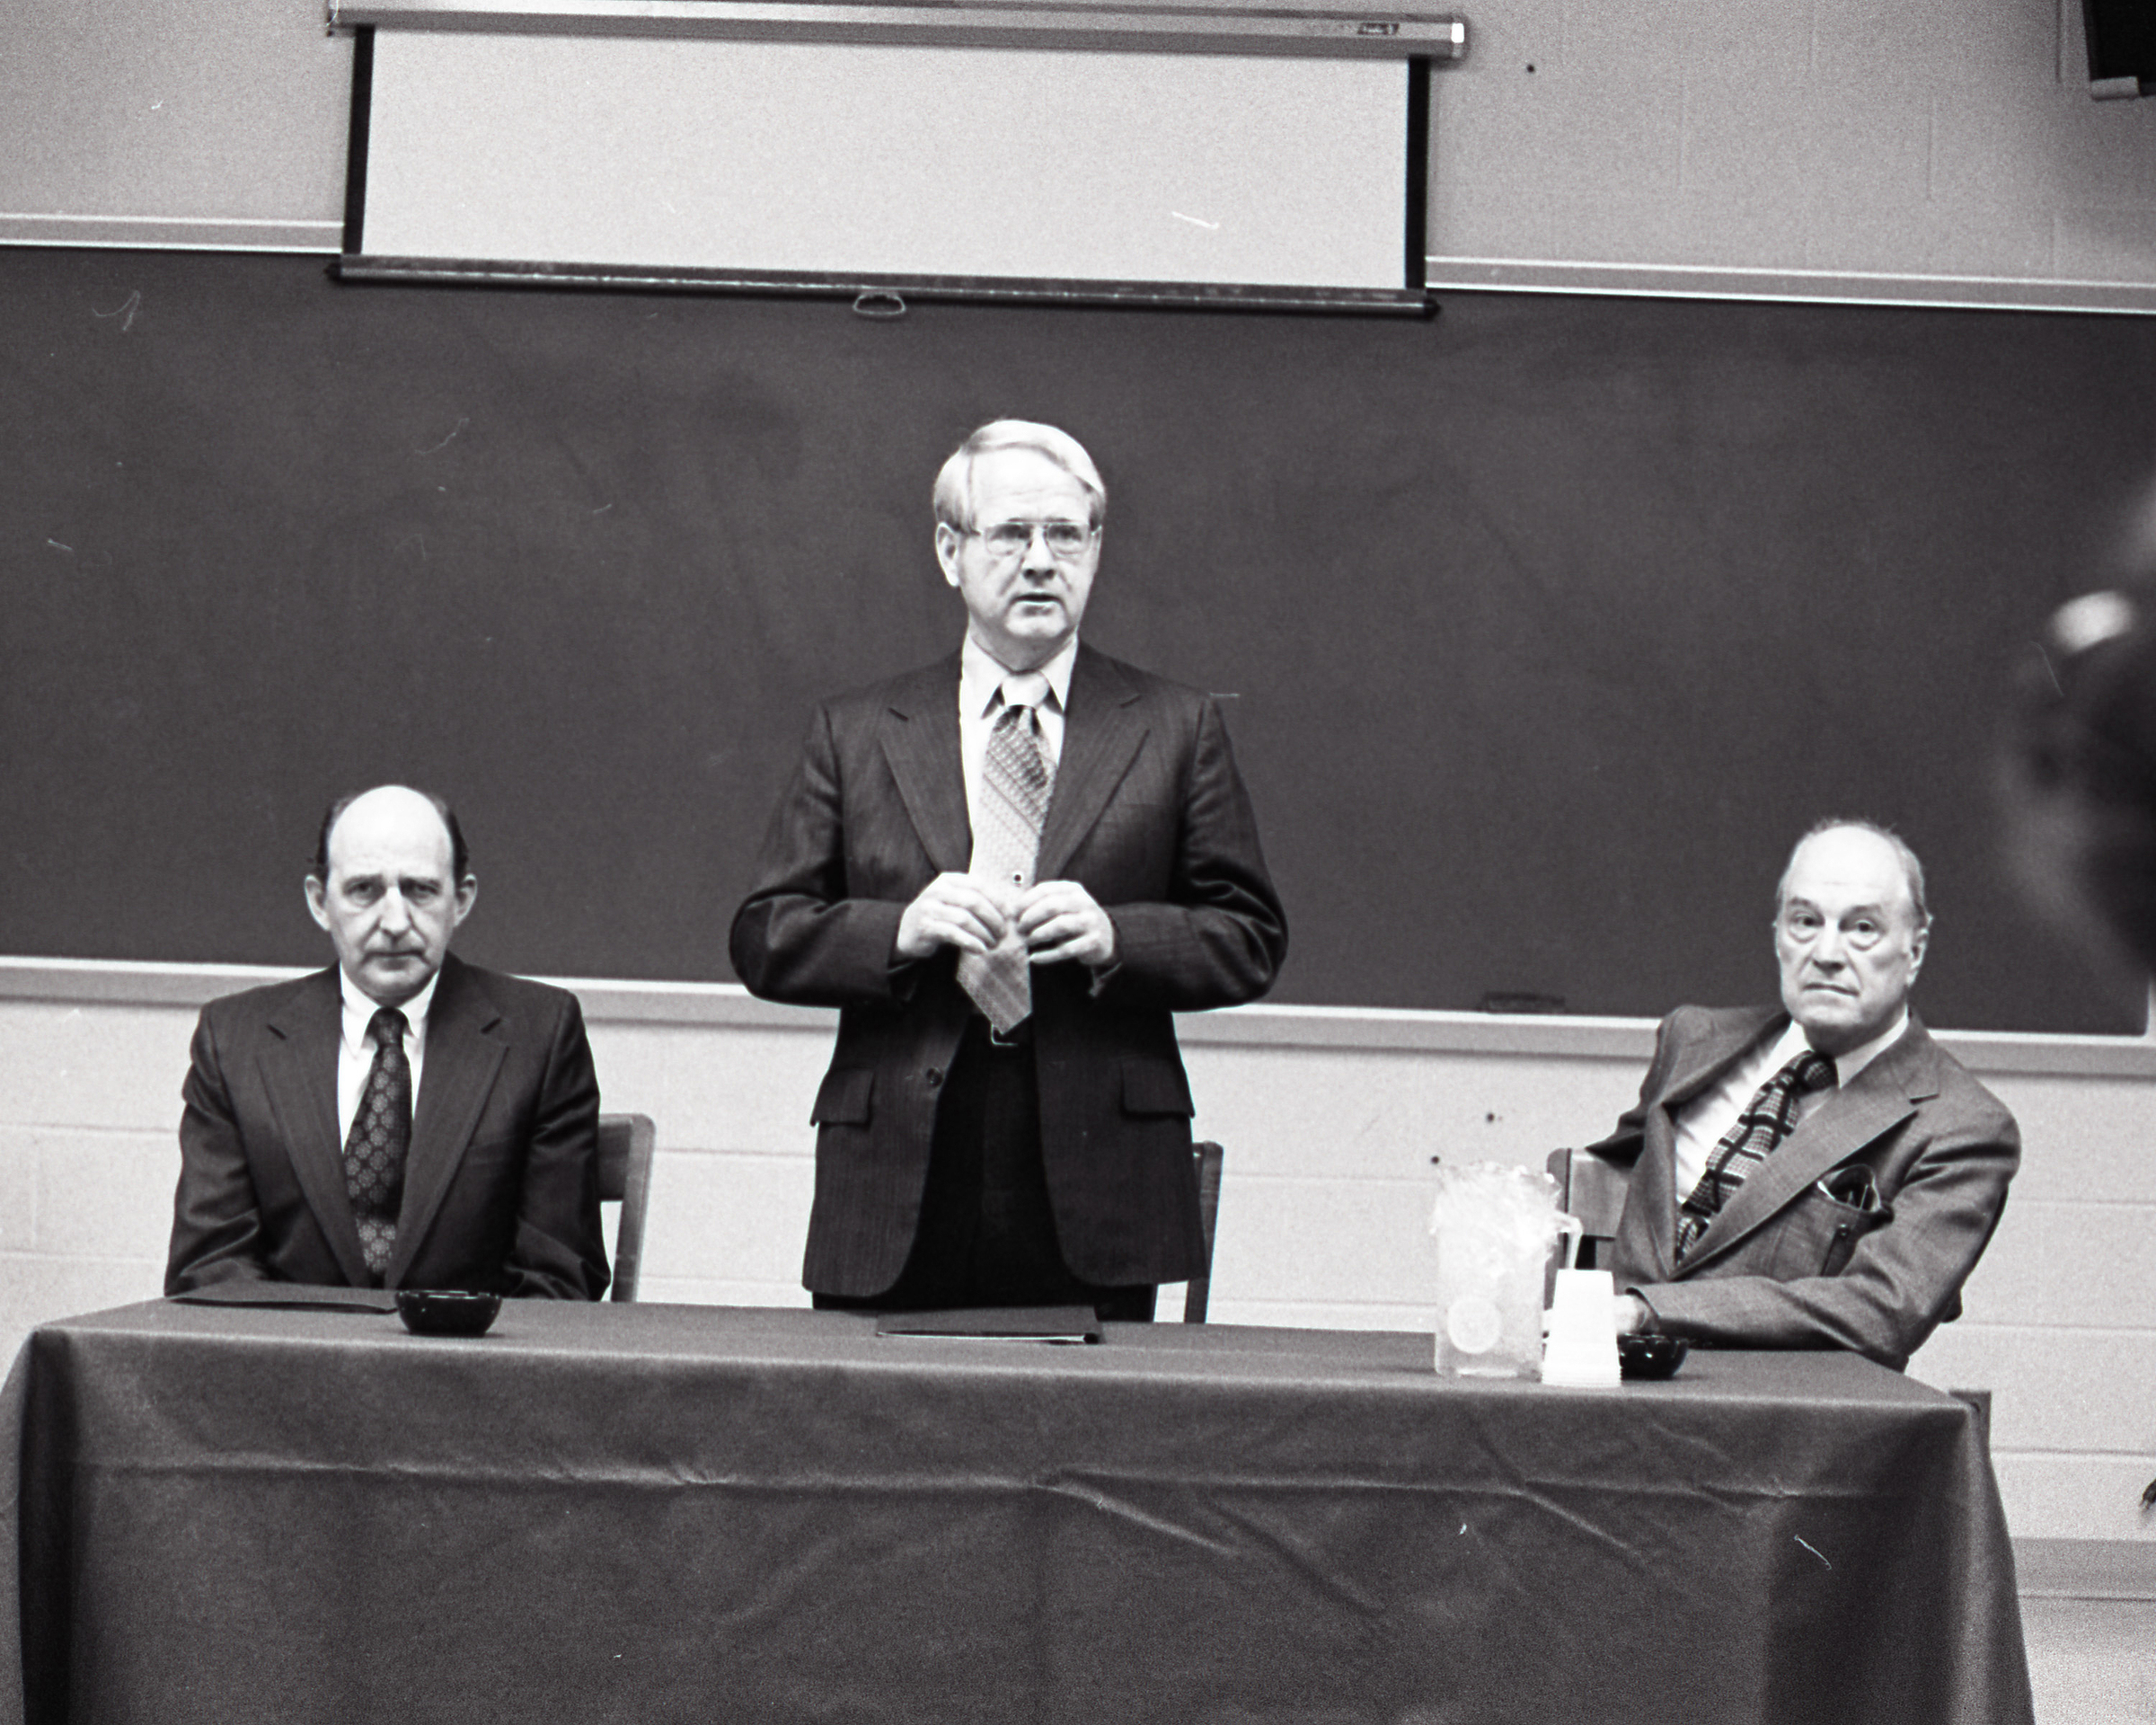 Dr. Vergil H. Dykstra is announced as president of George Mason University, April 3, 1973 